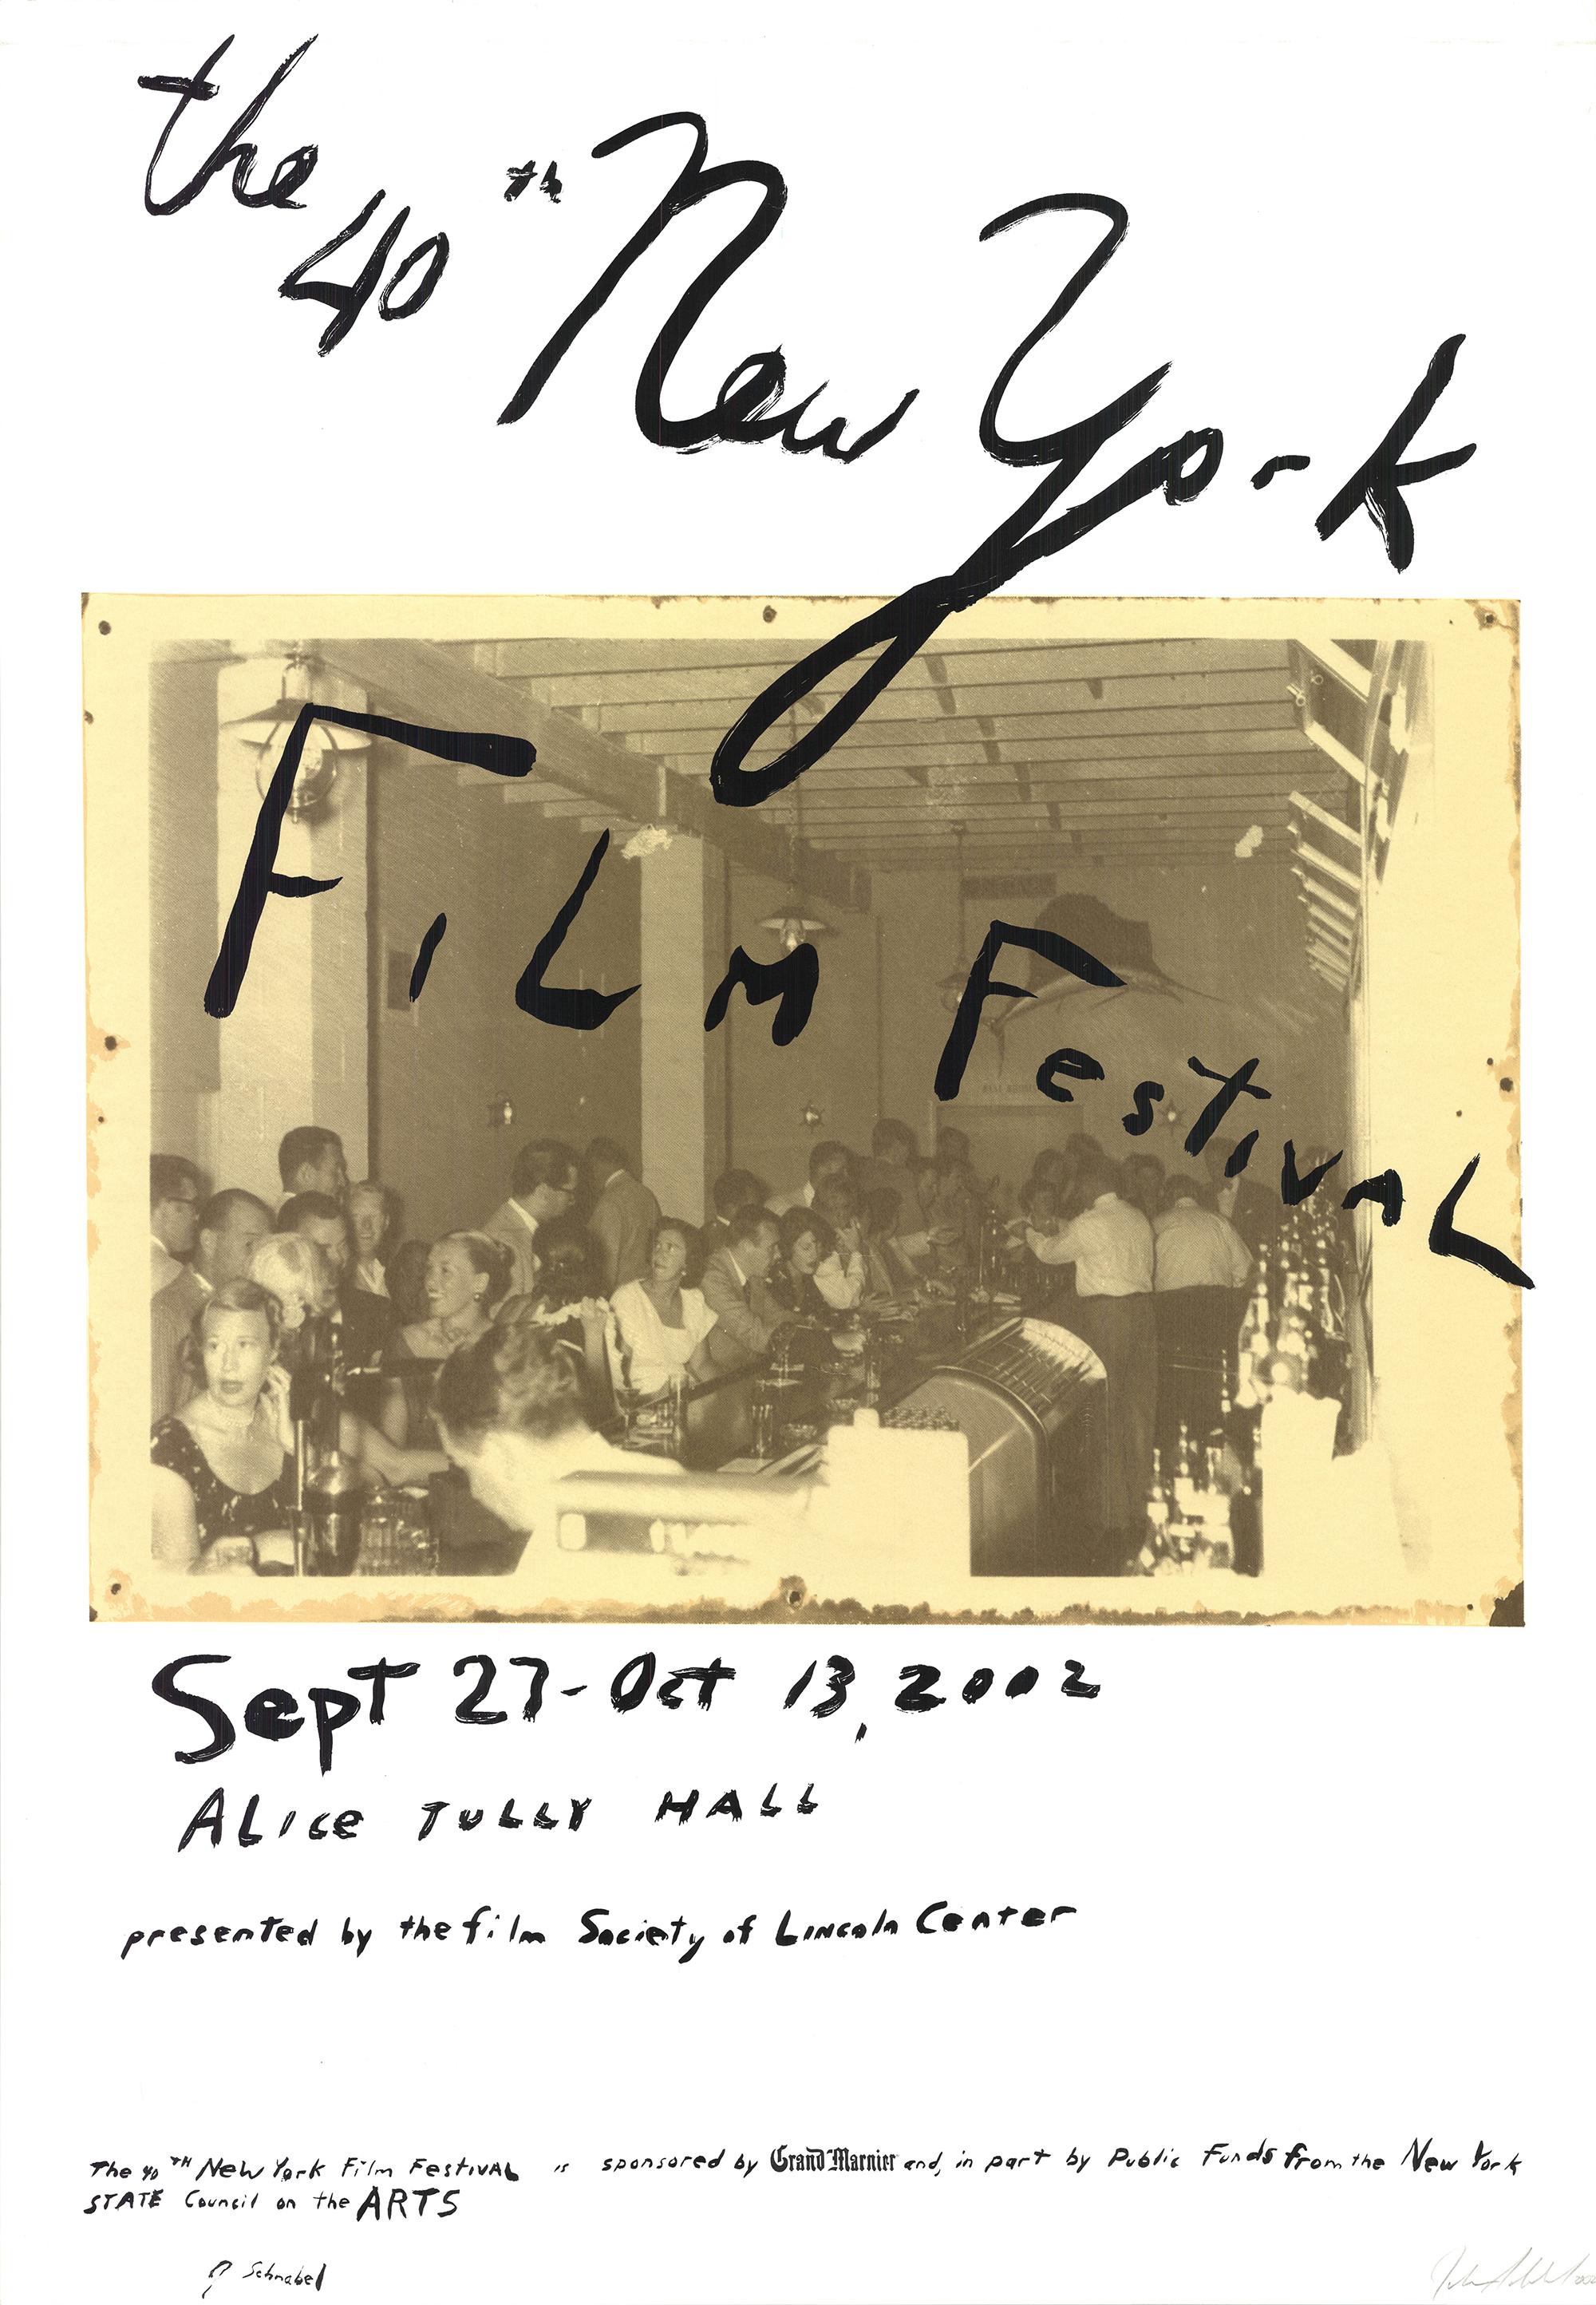 Poster for the 40th New York Film Festival at the Alice Tully Hall Sept 27- Oct 13, 2002. Poster is in very good condition with some minor denting present throughout the poster but mainly on the borders. The Image is an offset Lithograph with the